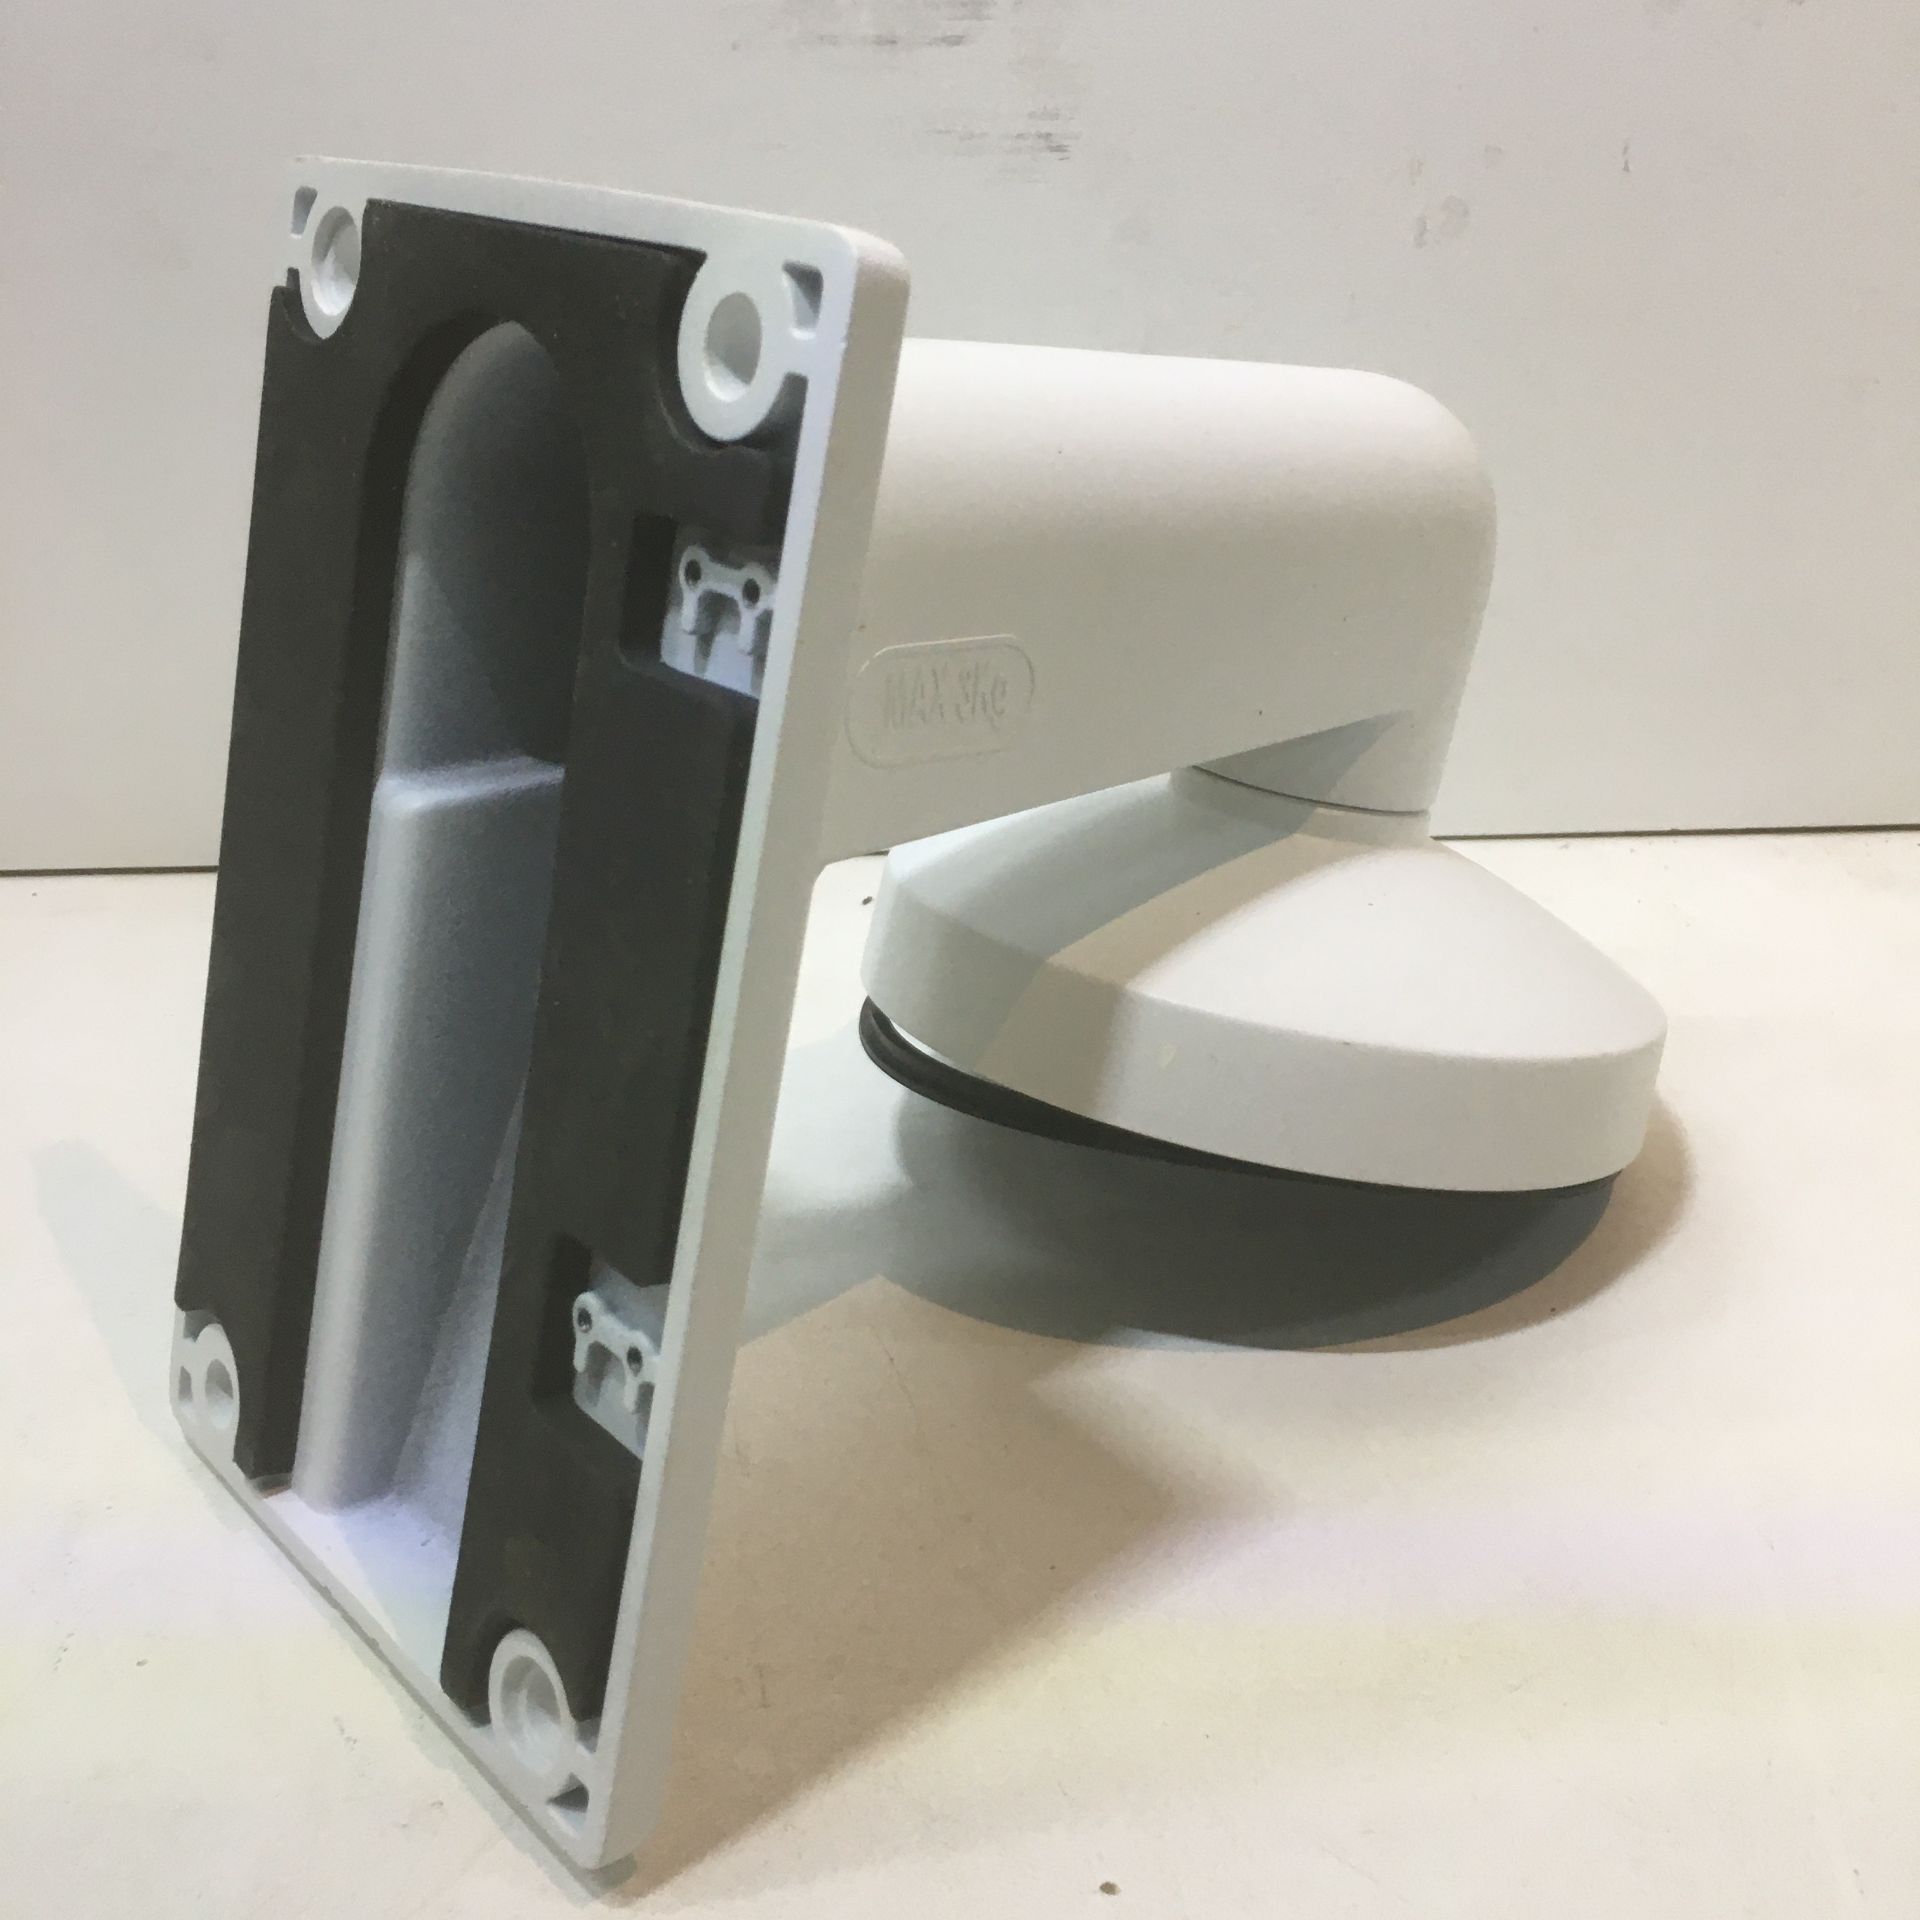 HikVision Ds-1273ZJ-135 Wall Mount For CCTV - Image 4 of 5